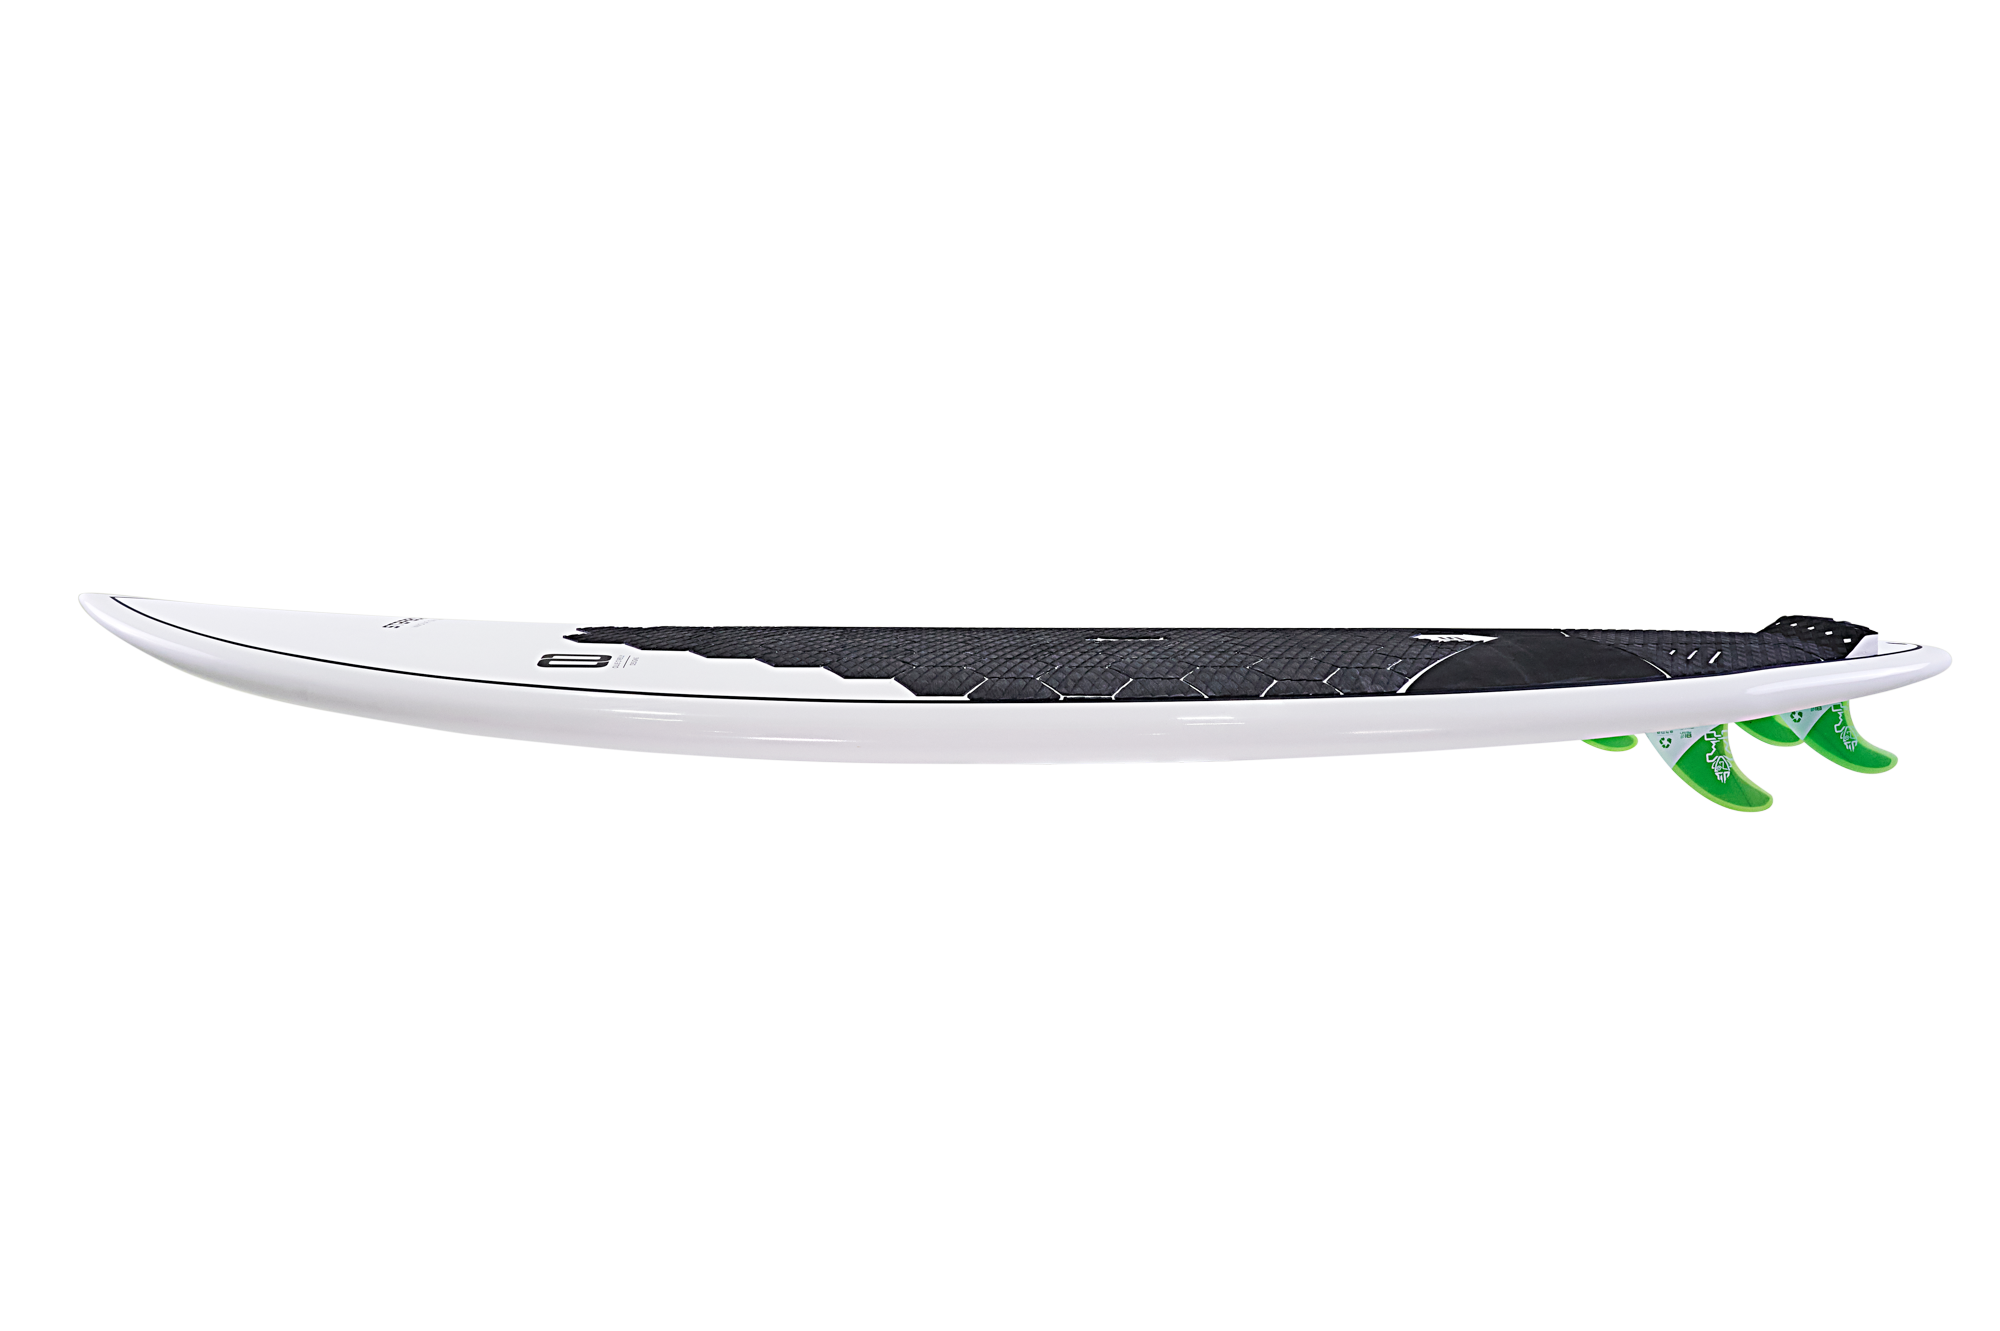 STARBOARD - SPICE LIMITED SERIES 8'2"